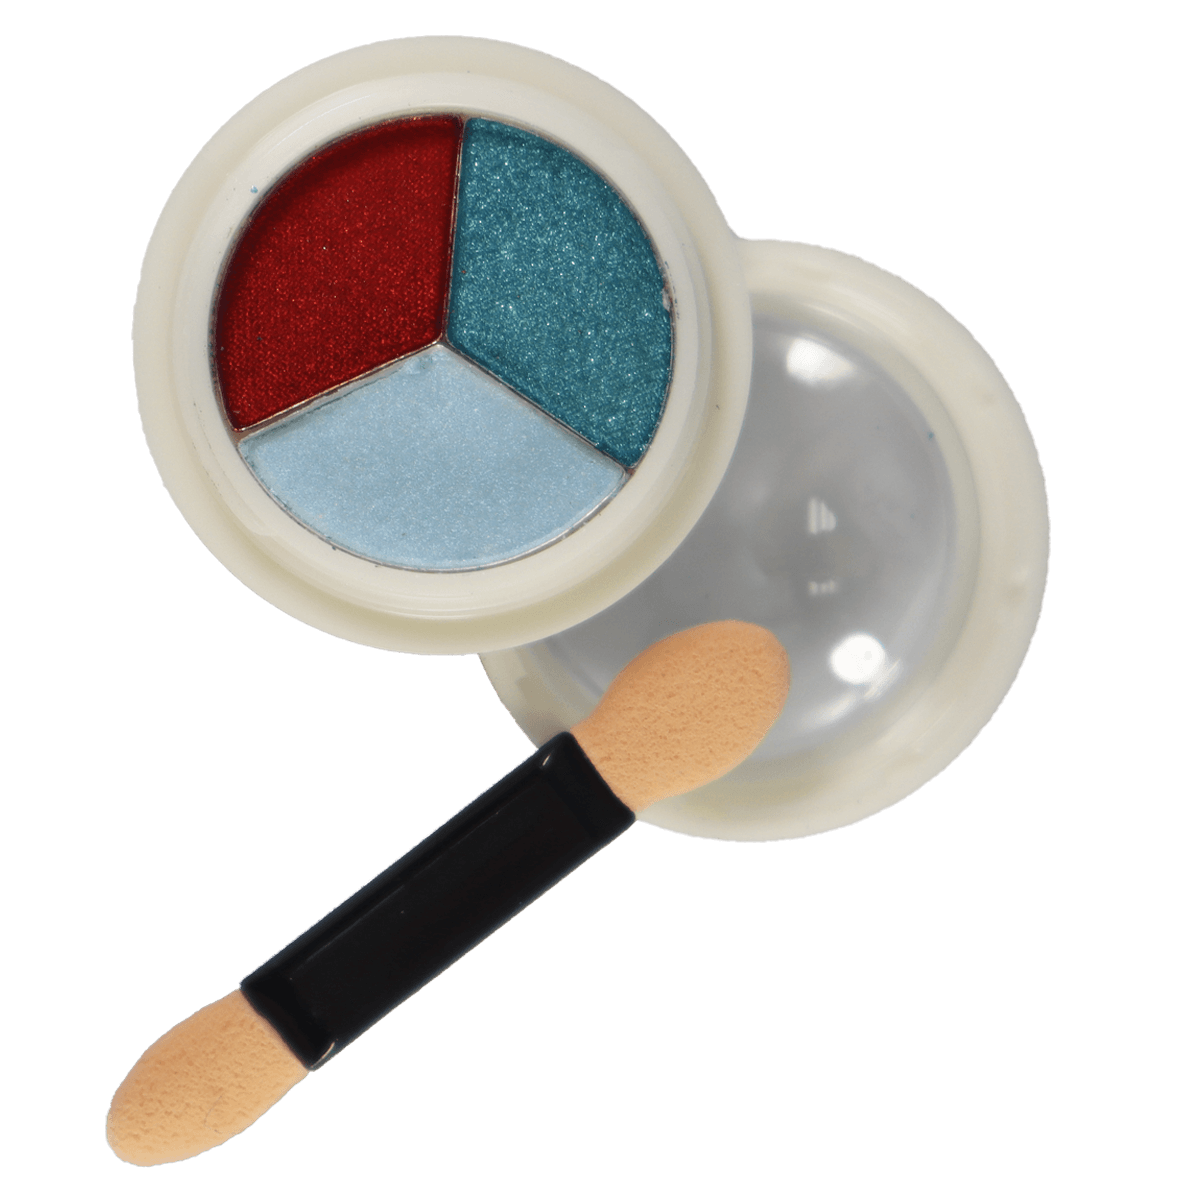 Solid Nail Powder Metallic Effect 3 Colors #06 Blue/Red